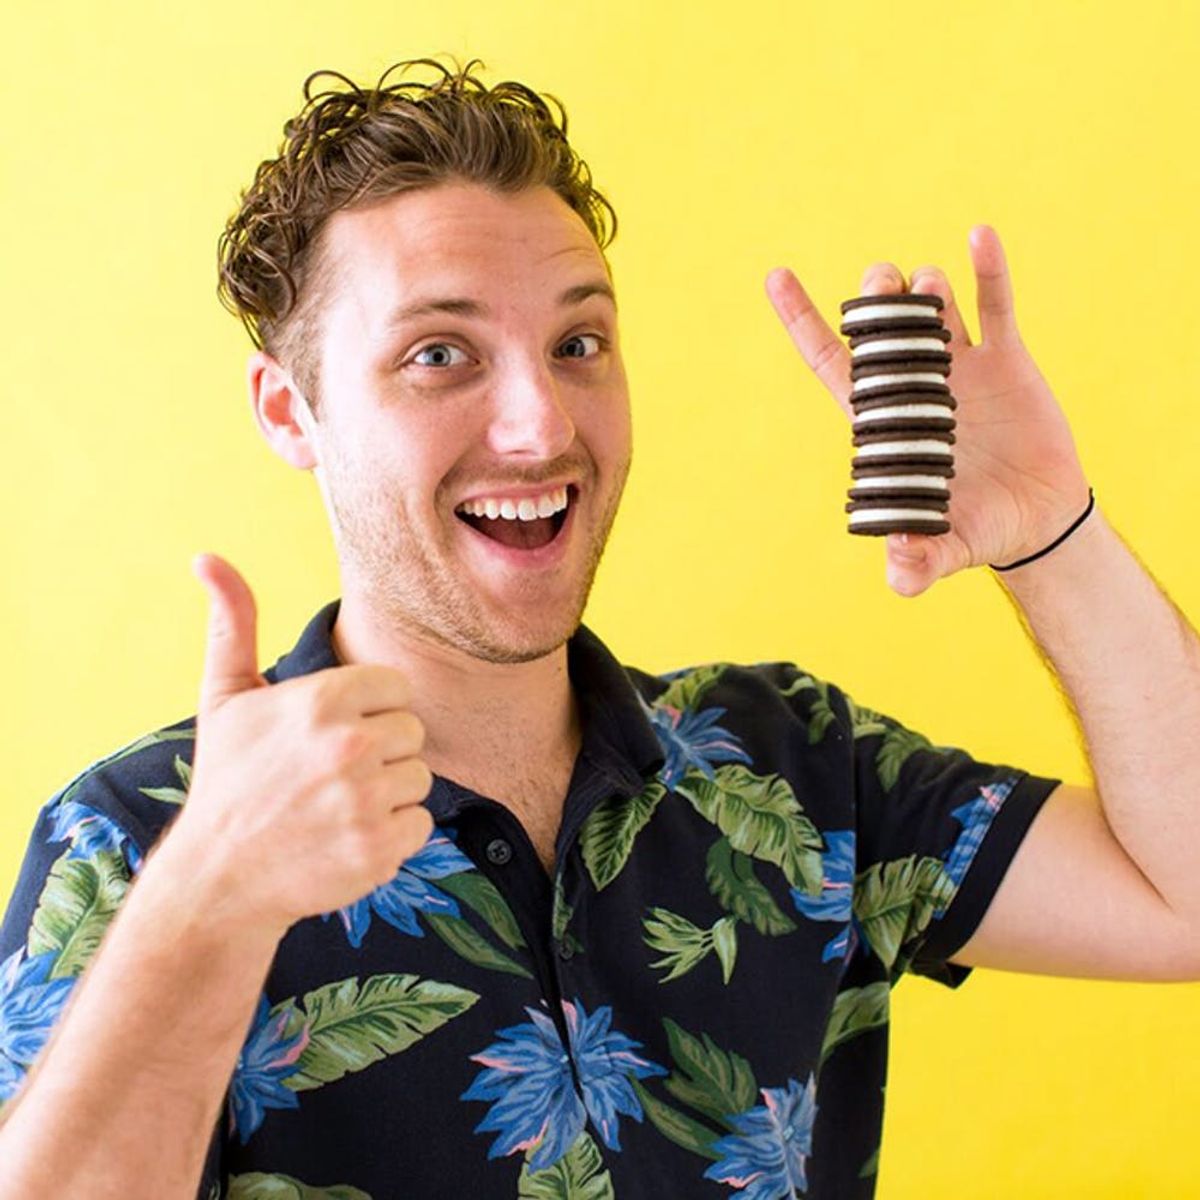 The Newest Oreo Flavor Is One You’ve Been Dreaming About